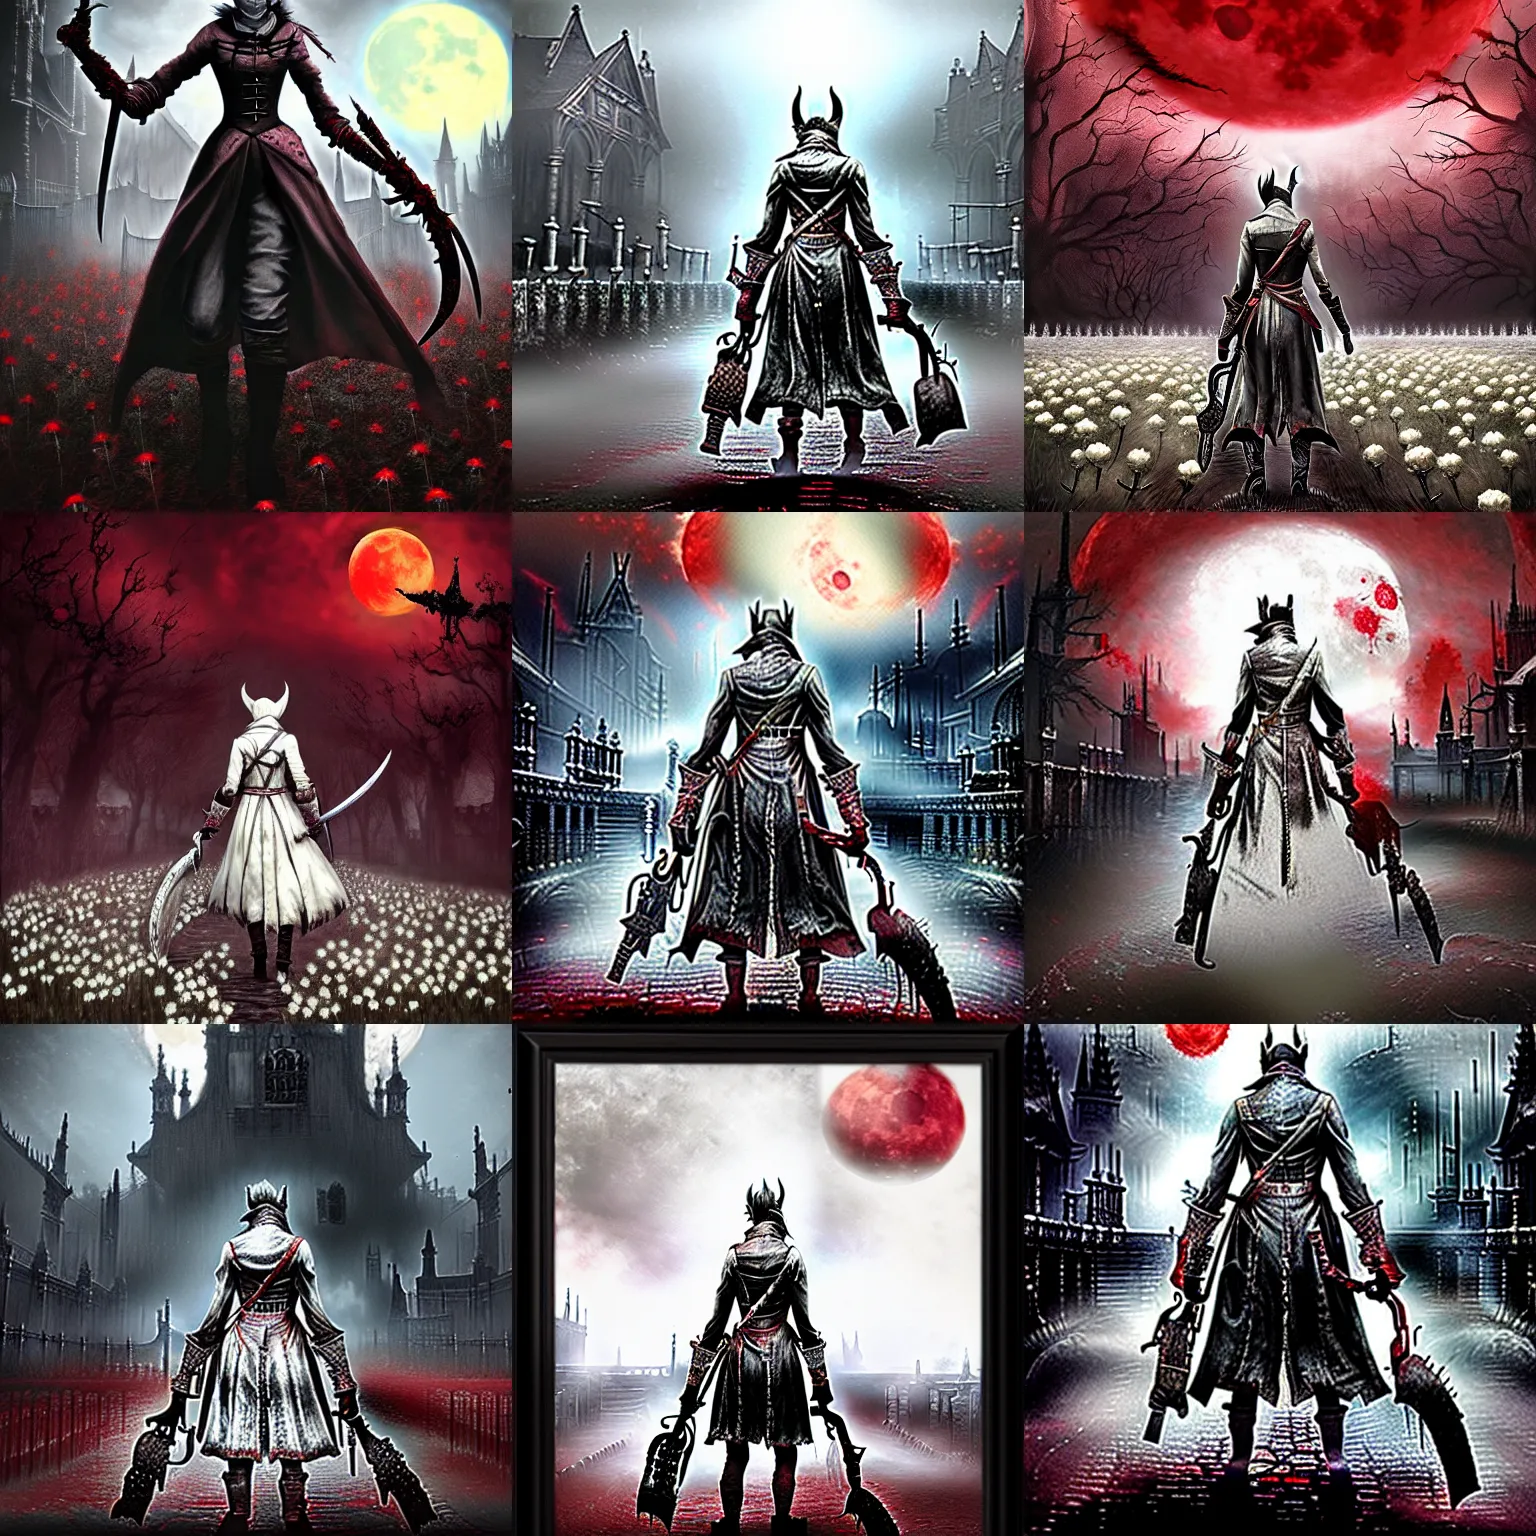 Prompt: bloodborne huntress, field of white flowers, red moon, romantic paint style